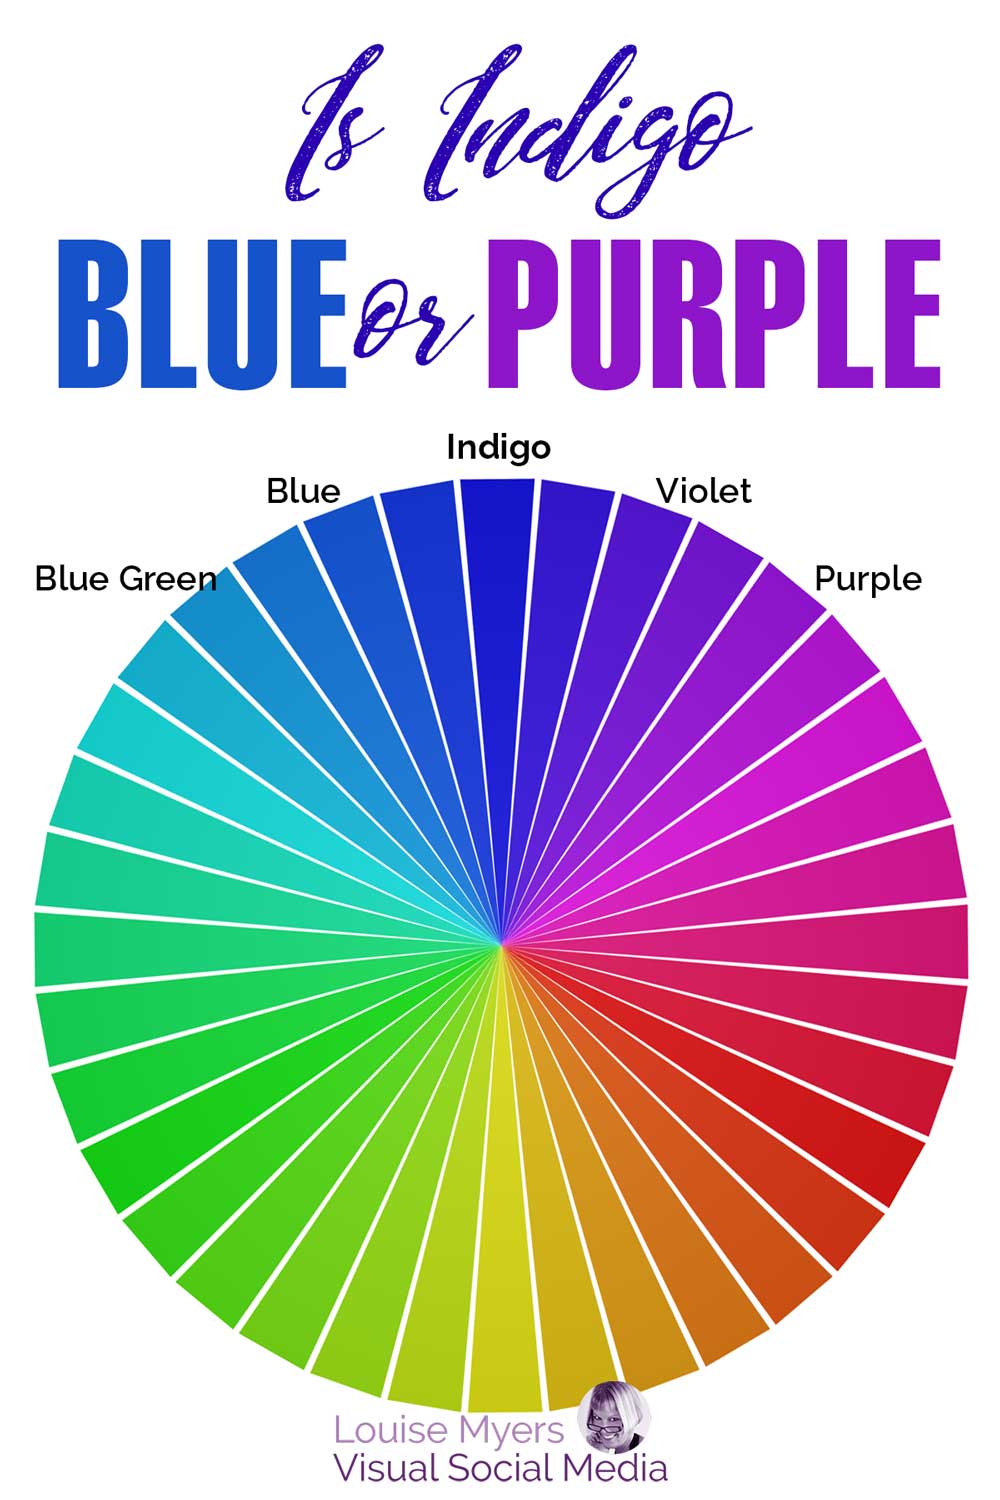 color wheel calls out blue, indigo, violet and purple with text asking, is indigo blue or purple?